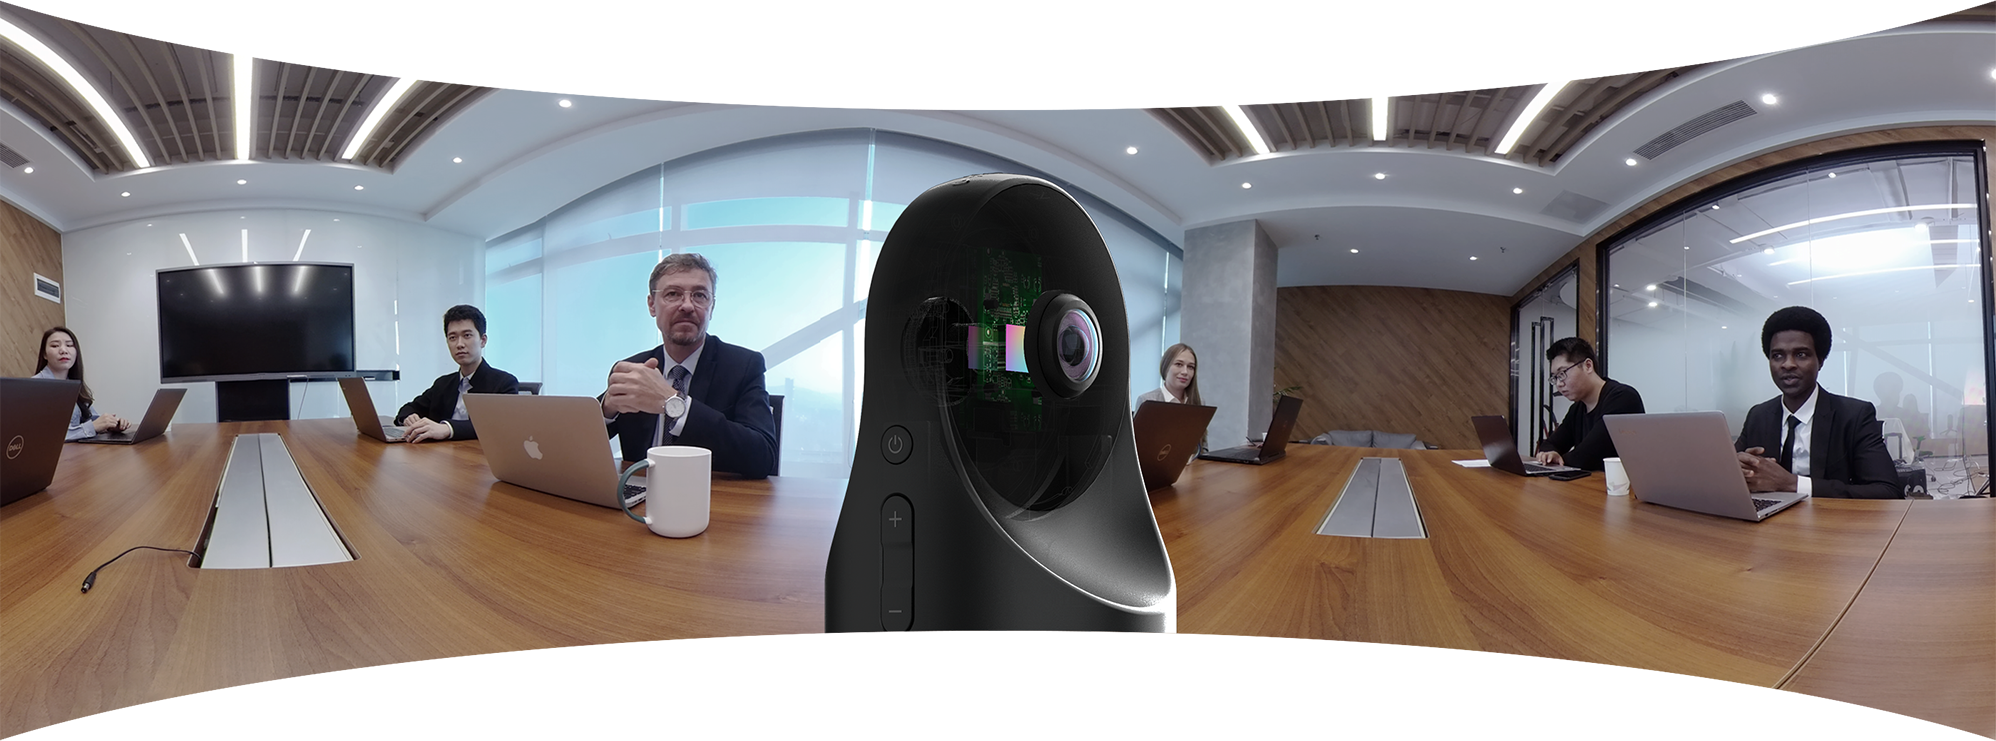 Kandao Meeting Pro is an AI-based 360° video conferencing device, which equipped with 360-degree lens, Omni-directional audio system, Hi-Fi Speaker, and built-in android system. 